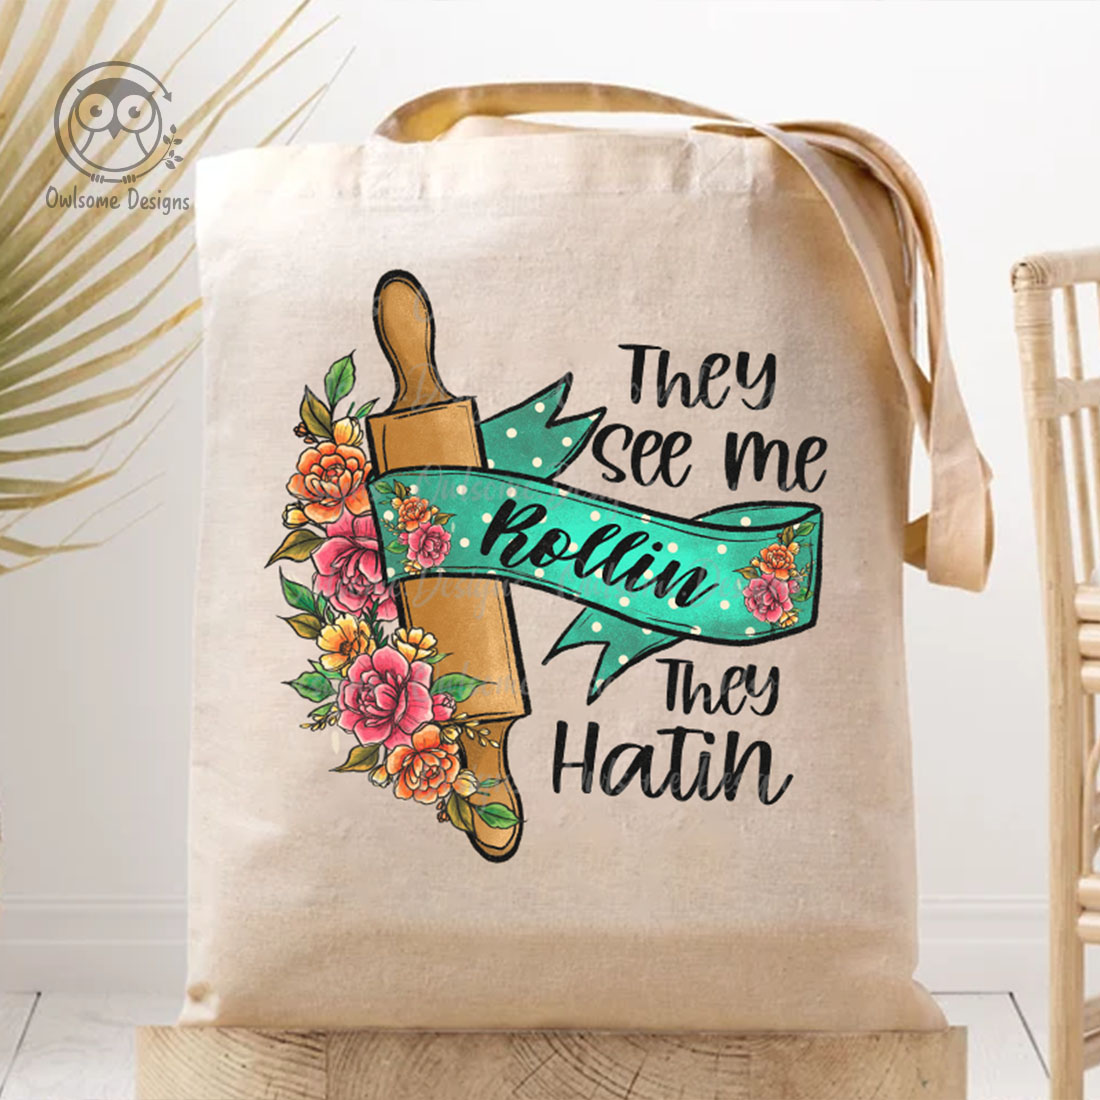 Picture of a bag with a unique print with a rolling pin.